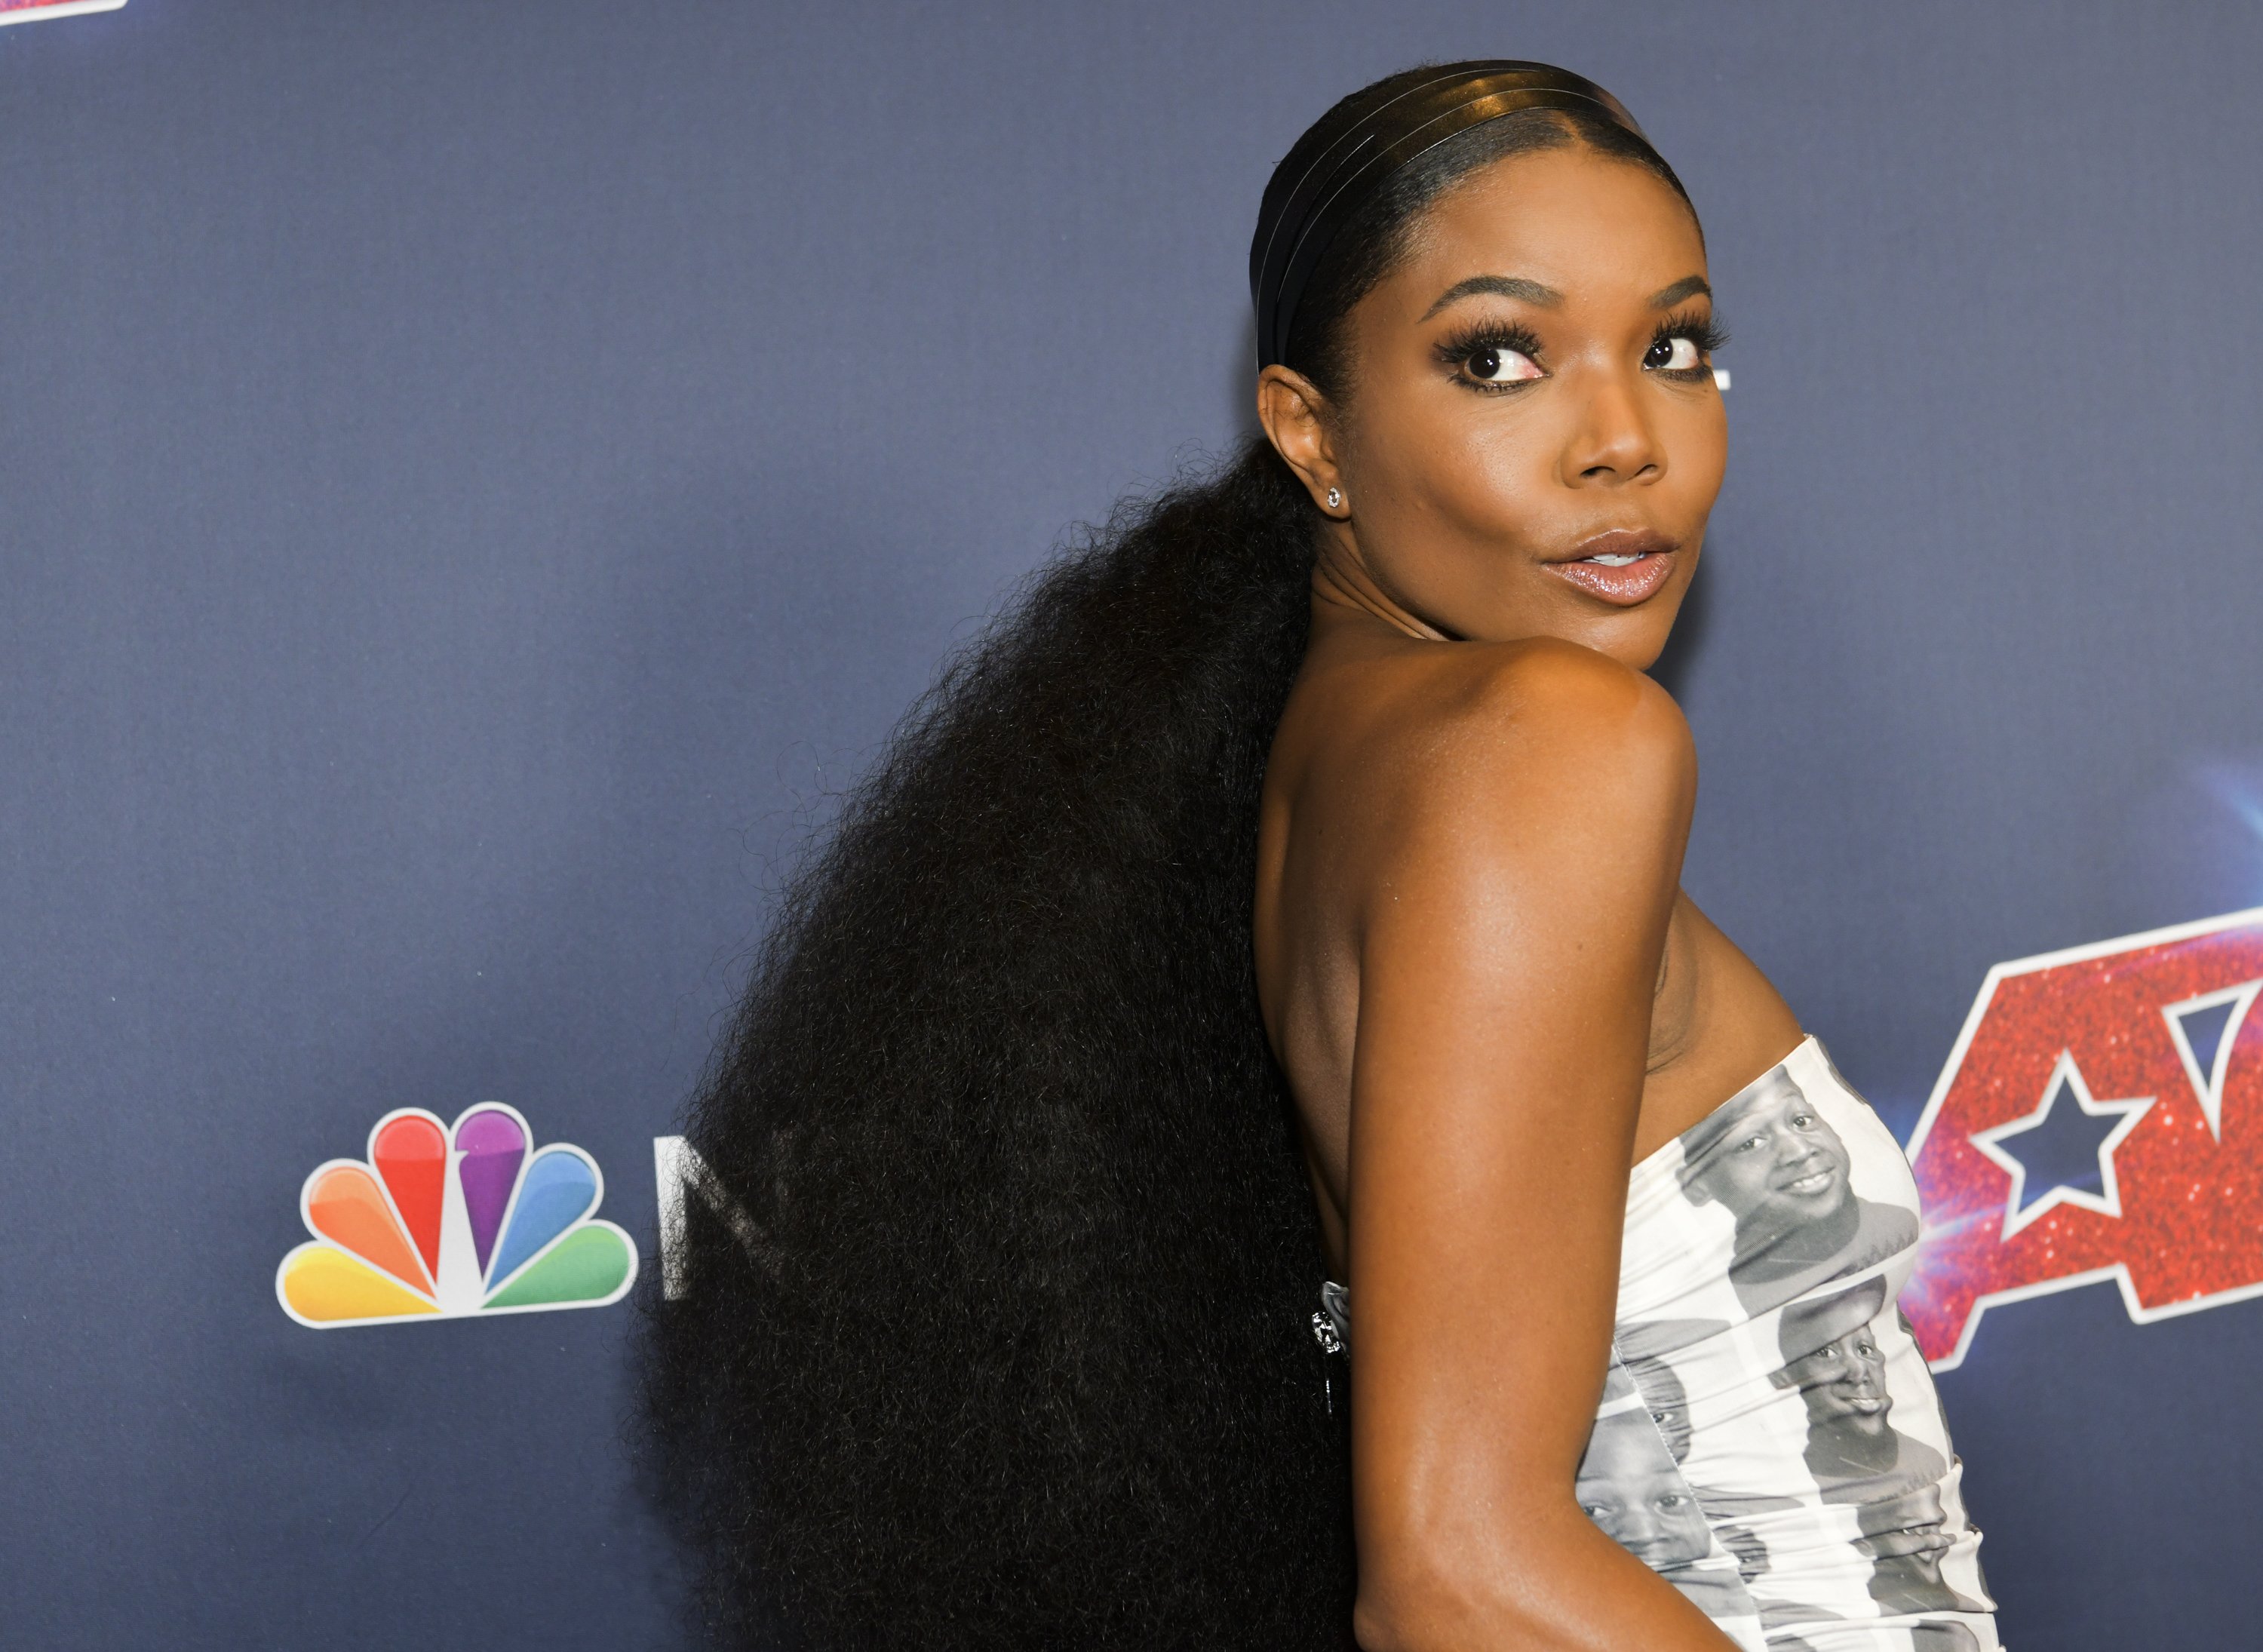 Gabrielle Union at the "America's Got Talent" Season 14 Live Show red carpet at Dolby Theatre in Hollywood, California on August 27, 2019 | Photo: Getty Images